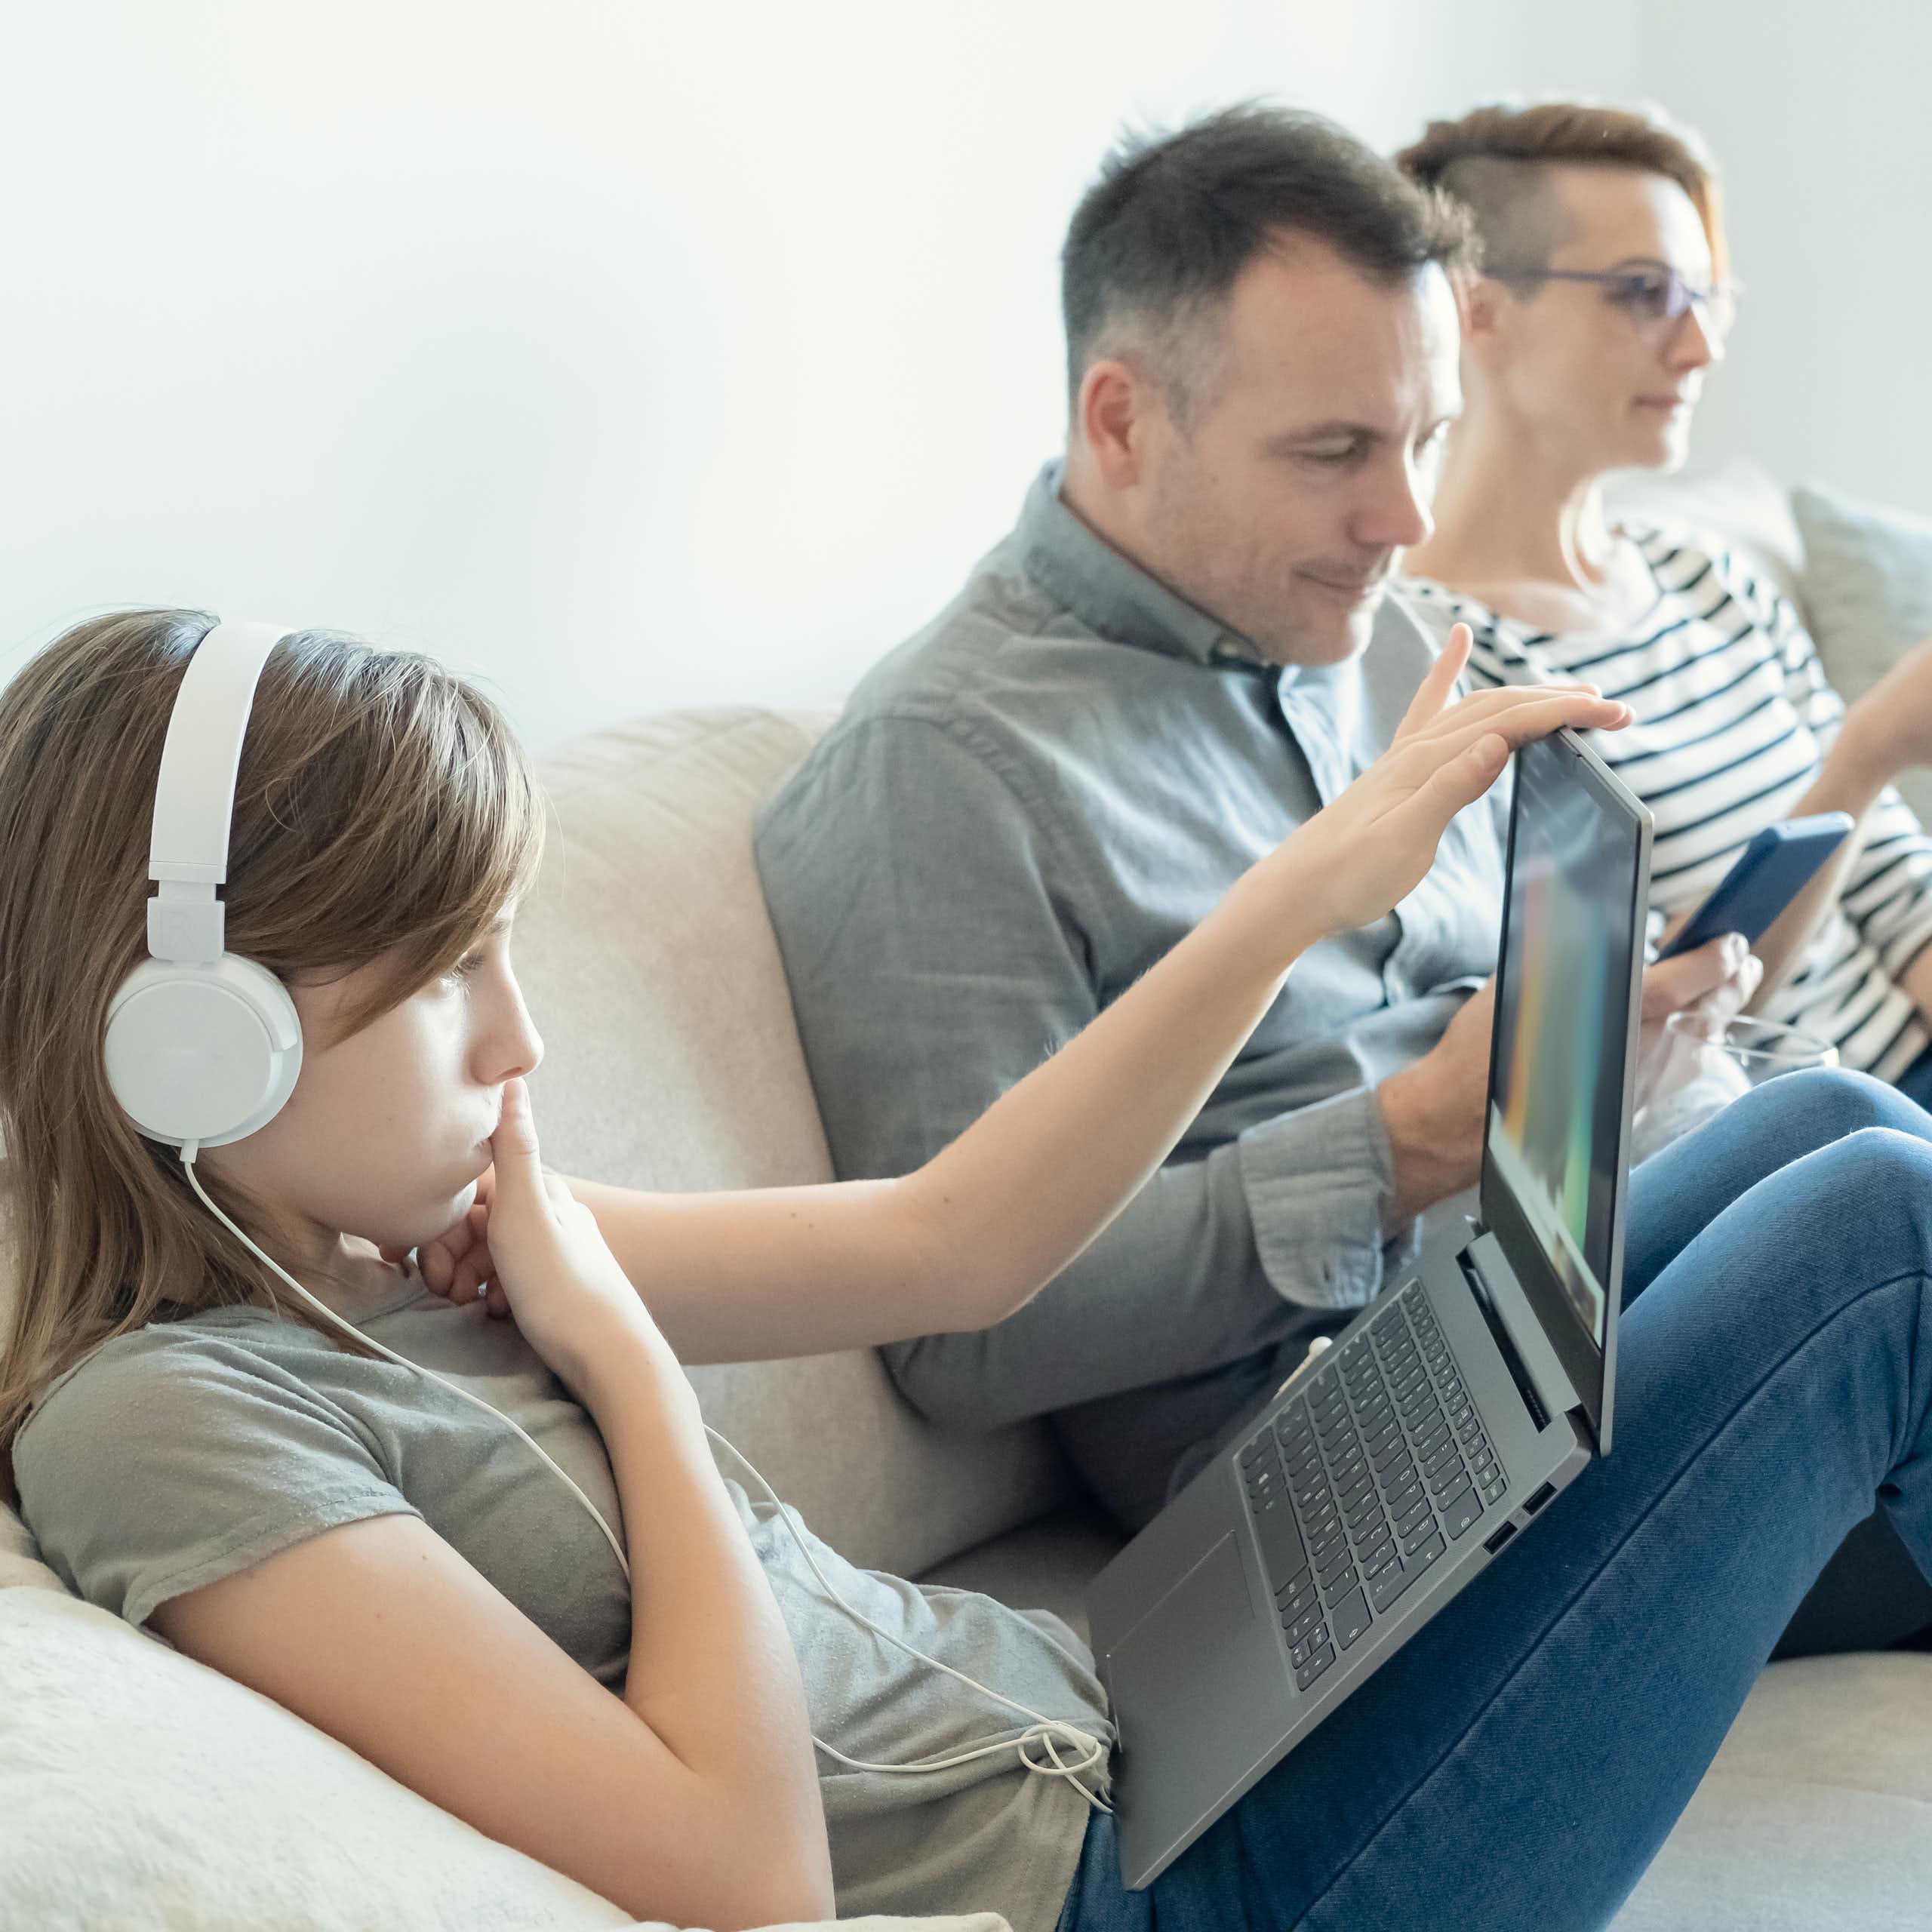 Family watches their own devices